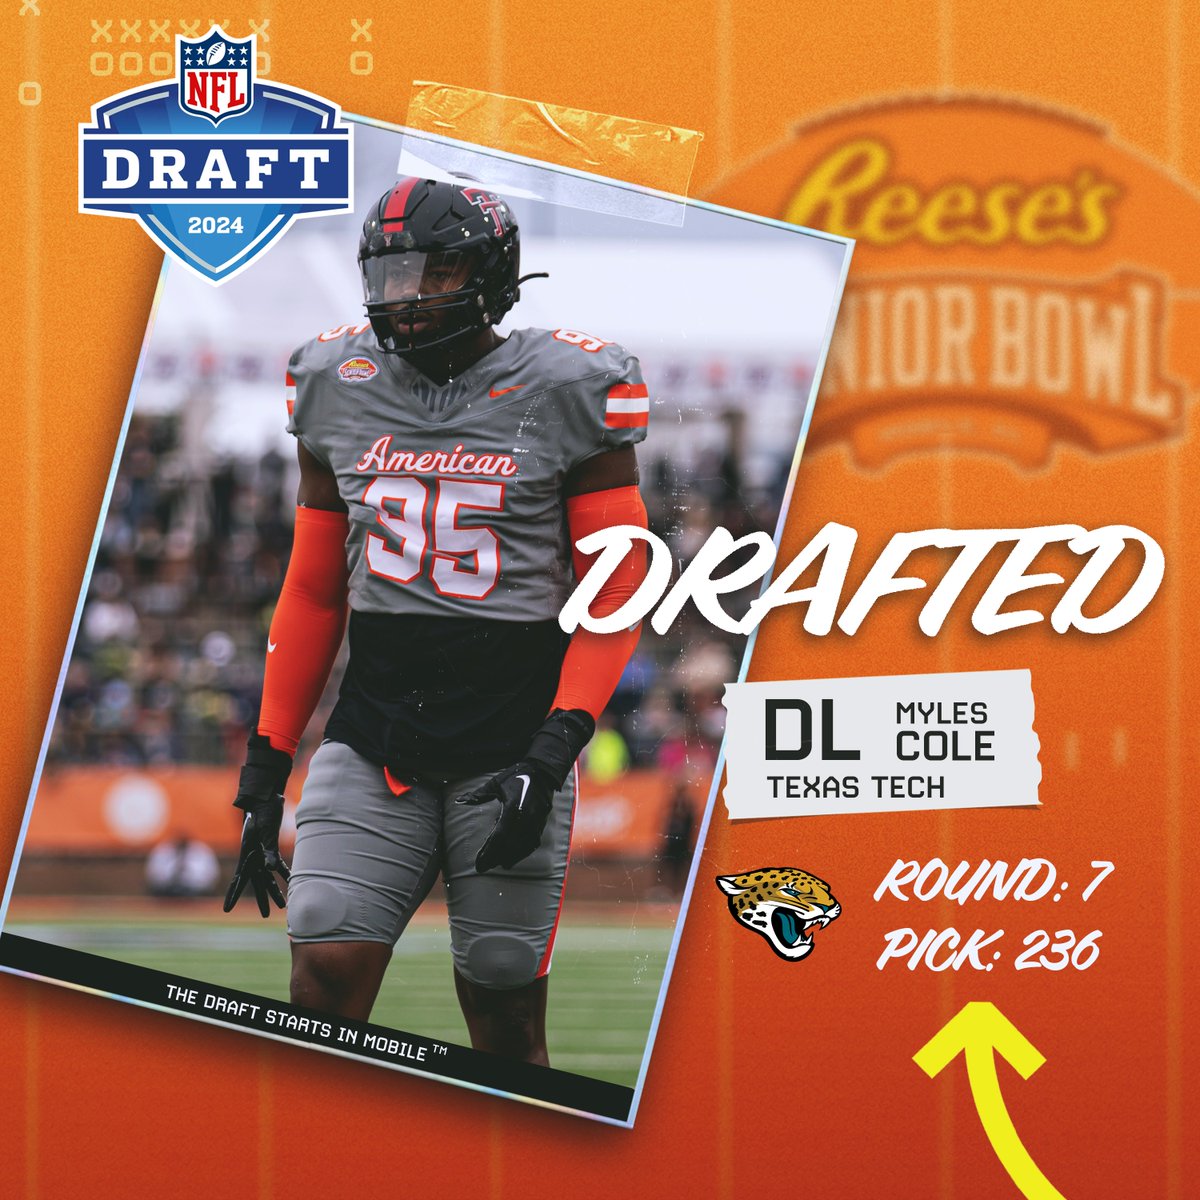 #NFLDraft The @Jaguars have selected Senior Bowl alum @mdoc55 out of @TexasTechFB. Congratulations! #DUUUVAL #TheDraftStartsInMOBILE™️